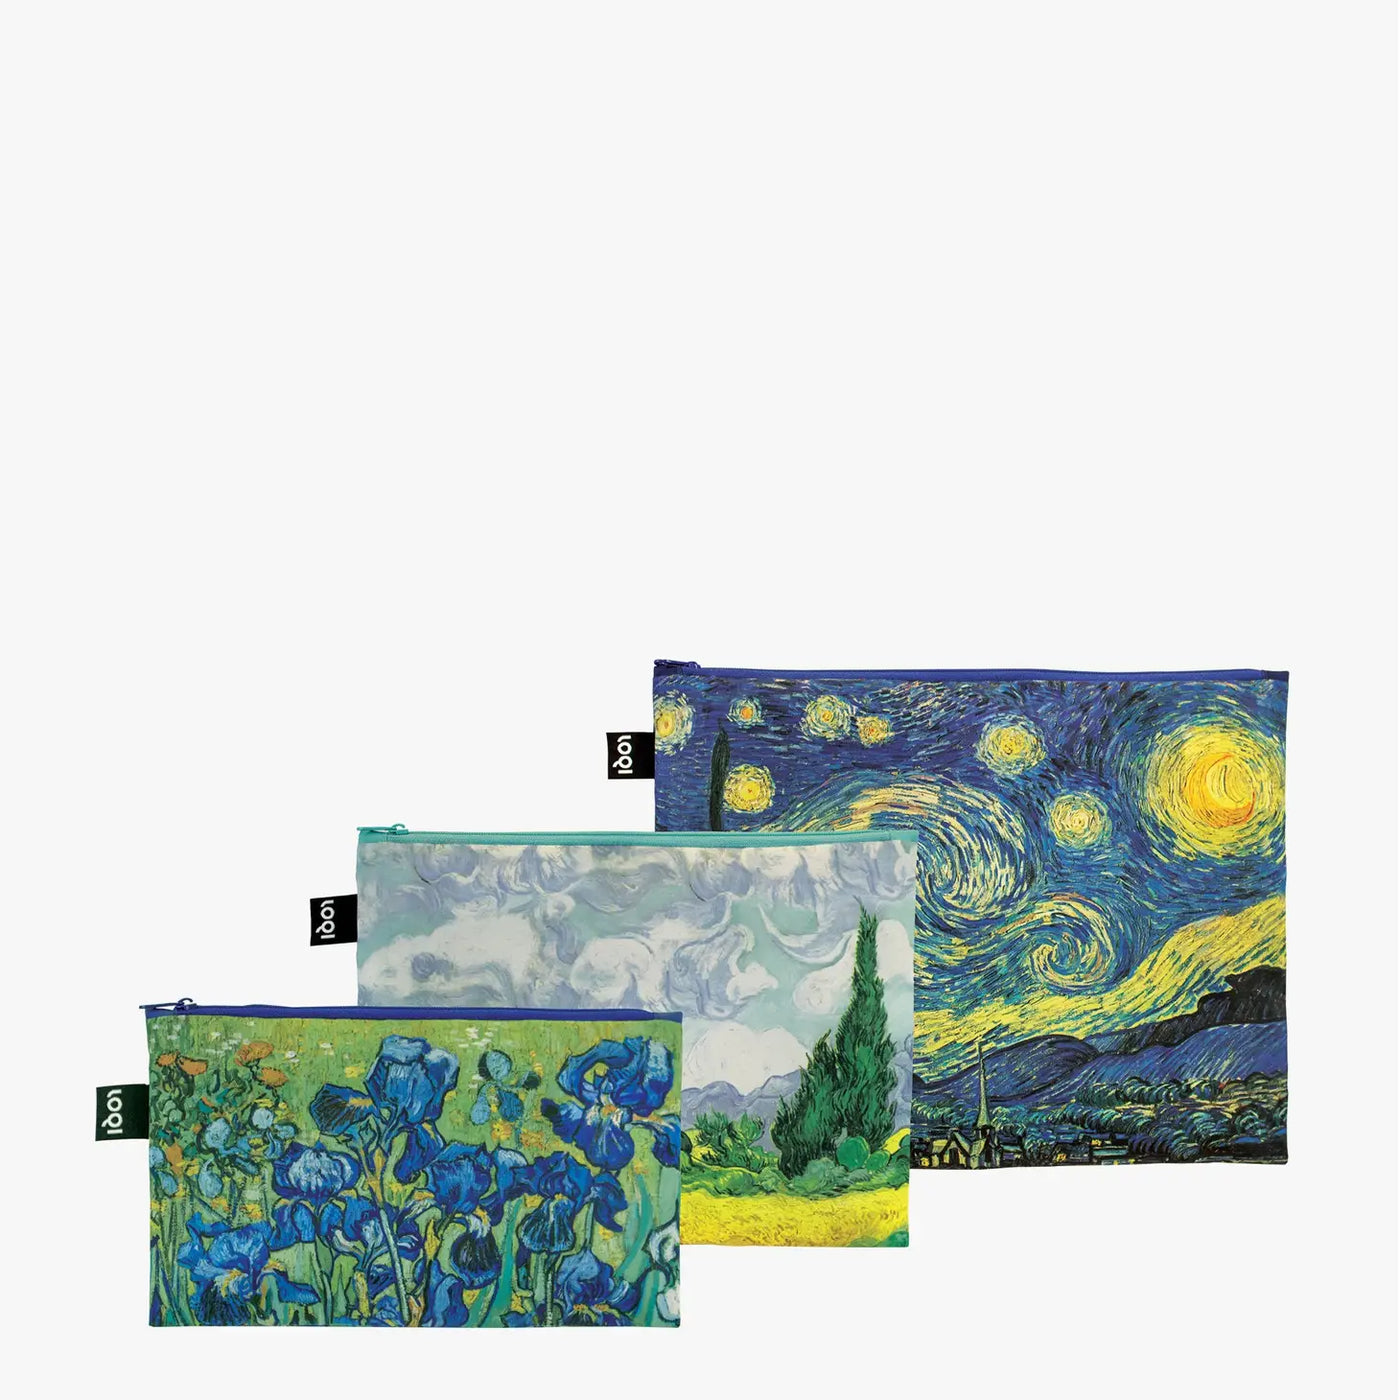 Consuming colors. Sumptuous swirls. Painfully painterly. The recycled zip pocket set pays homage to Vincent van Gogh (1853-1890) and exquisite nature. "if you look closely, all of nature has its beauty… I lose myself in it. And then, as if it’s in a dream, the scene just paints itself for me…"  Including: Starry Night, Irises, and Wheat field with cypresses